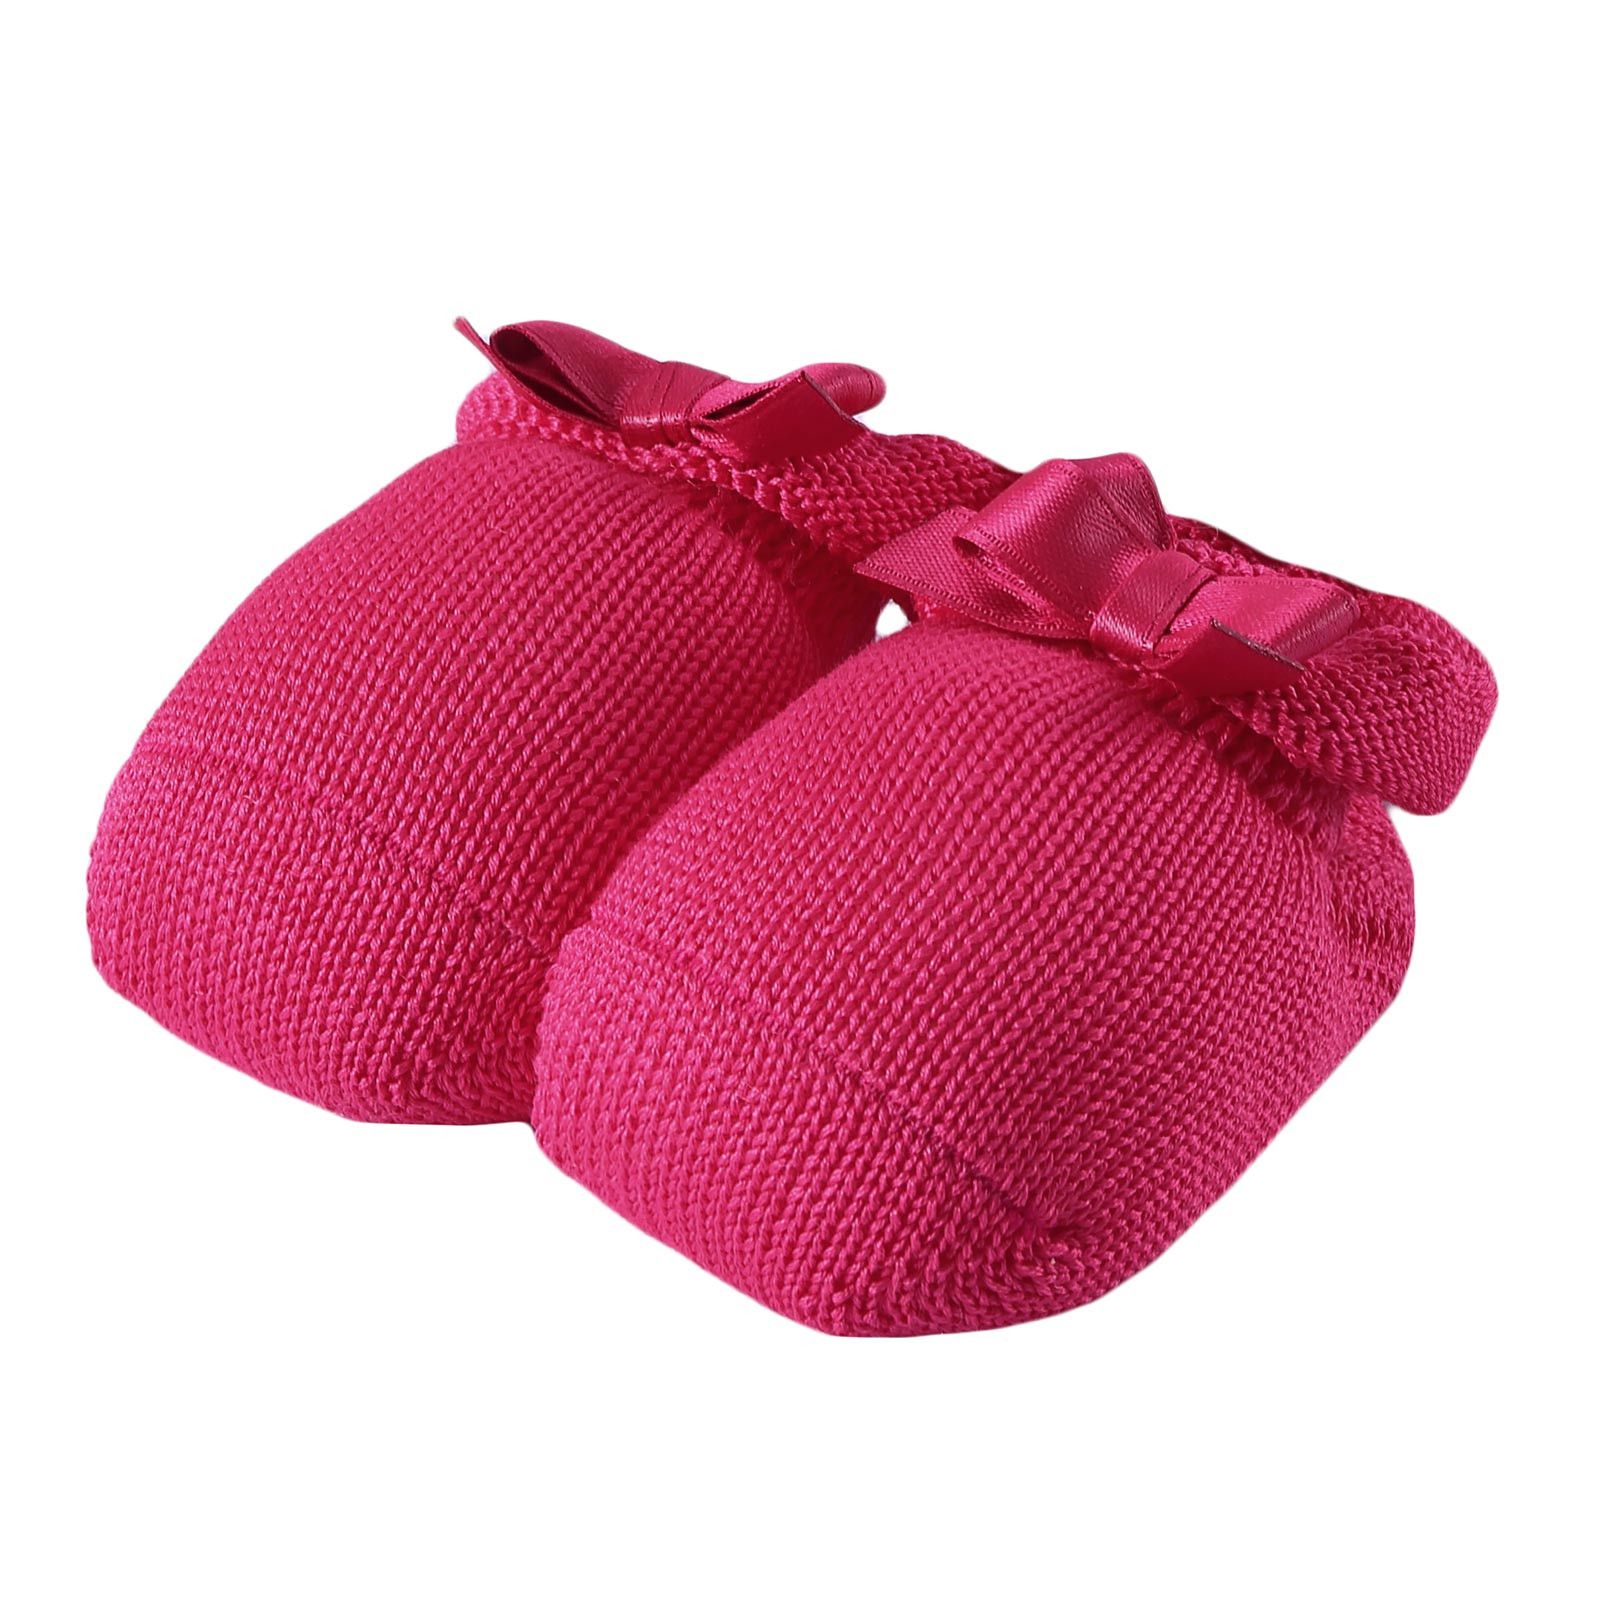 Baby Red Knitted Cotton Shoes & Hair Band Gift Set - CÉMAROSE | Children's Fashion Store - 2